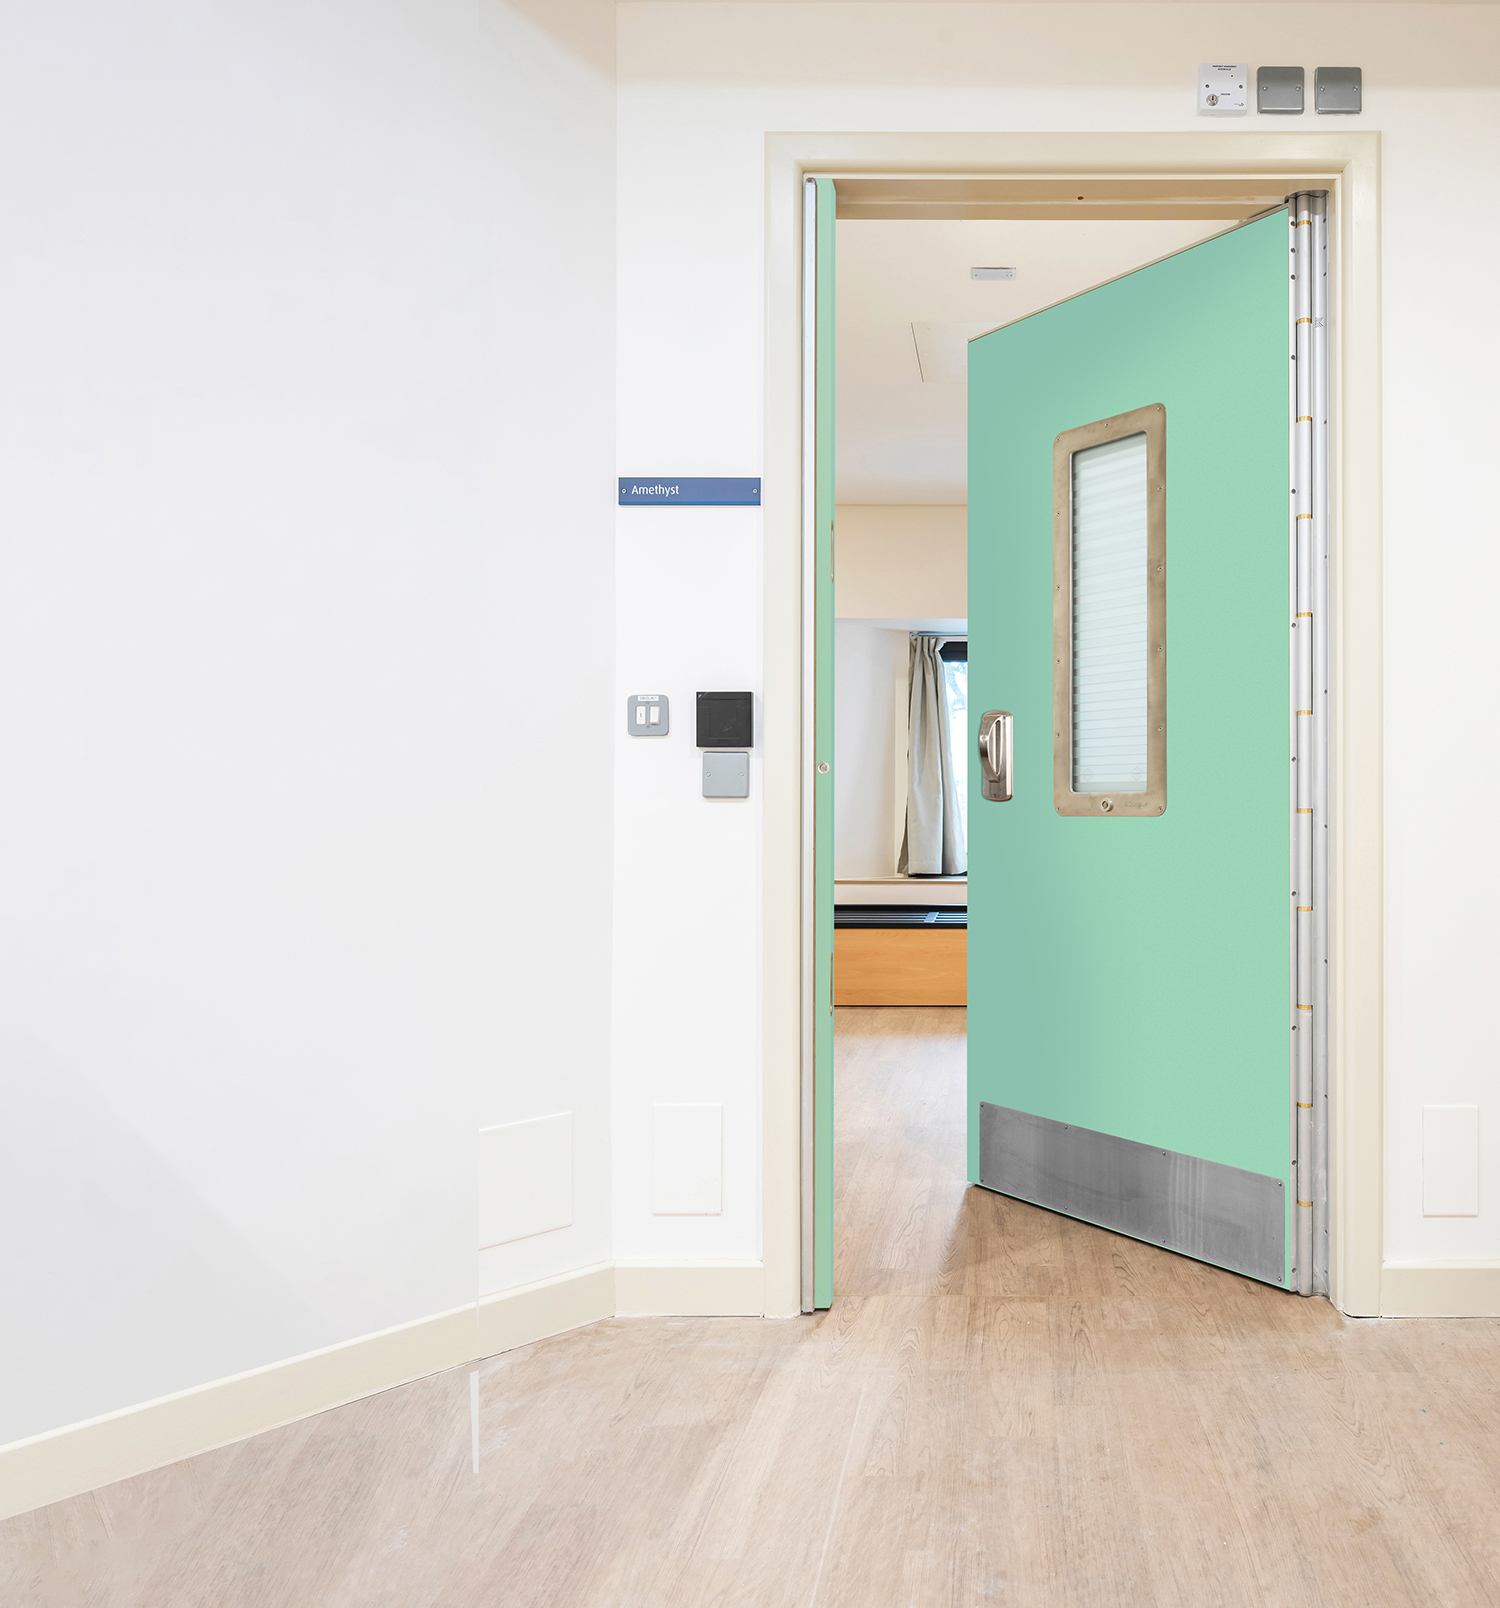 Ligature-Resistant Door Systems Category Image